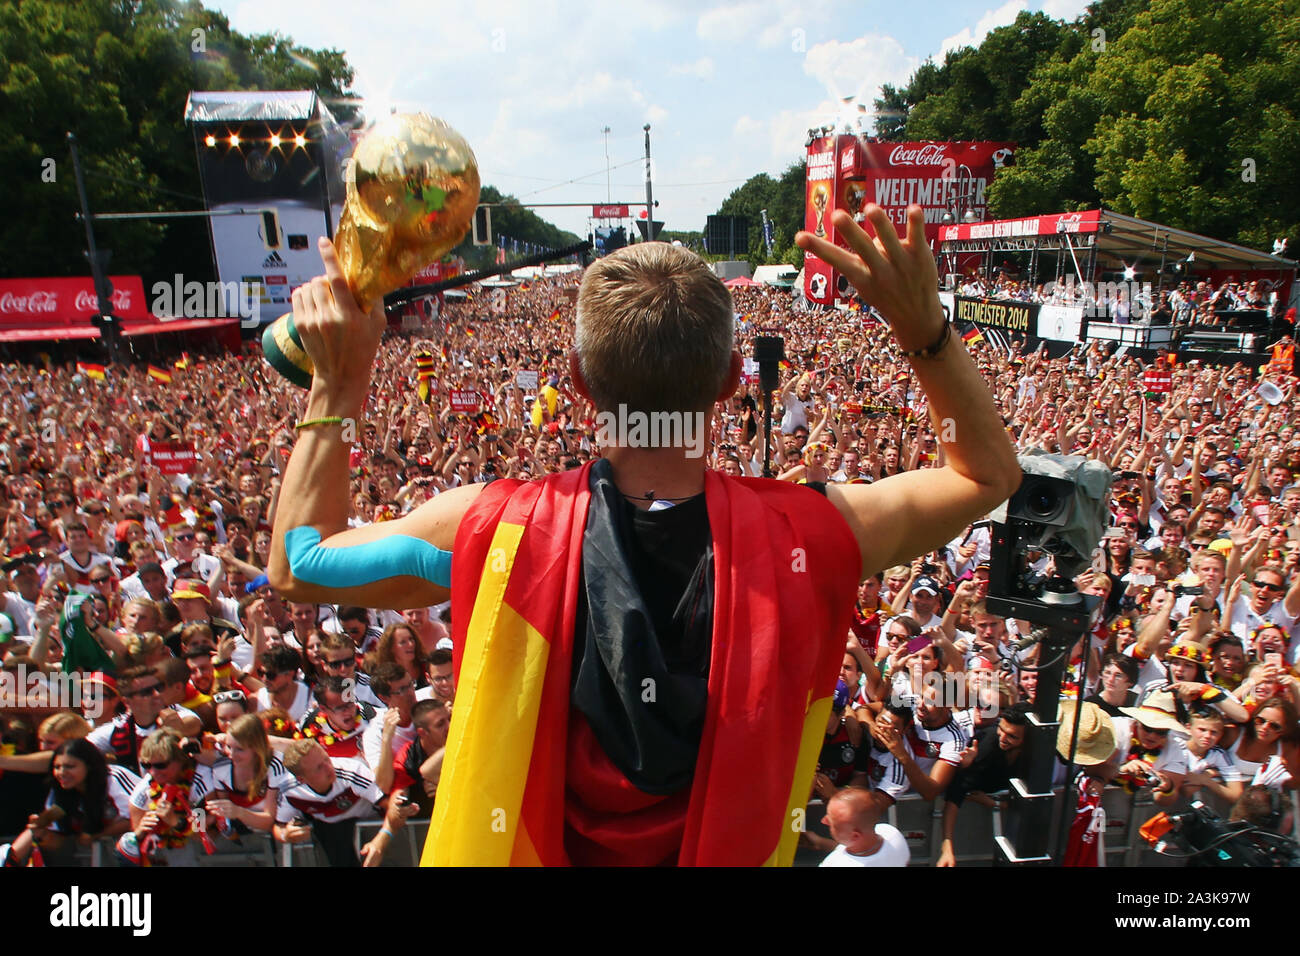 Bastian SCHWEINSTEIGER ends his career! Archive picture: Bastian SCHWEINSTEIGER (Germany) with World Cup trophy and Germany flag reception / World Cup party / ride on a truck / truck to celebrate the German national football team on the fan mile at the Brandenburg Gate in Berlin - reception of the German national football team in Berlin, DFB Party Feast of the World Champions on 15.07.2014 in Berlin, POOL PHOTO ¬ | usage worldwide Stock Photo